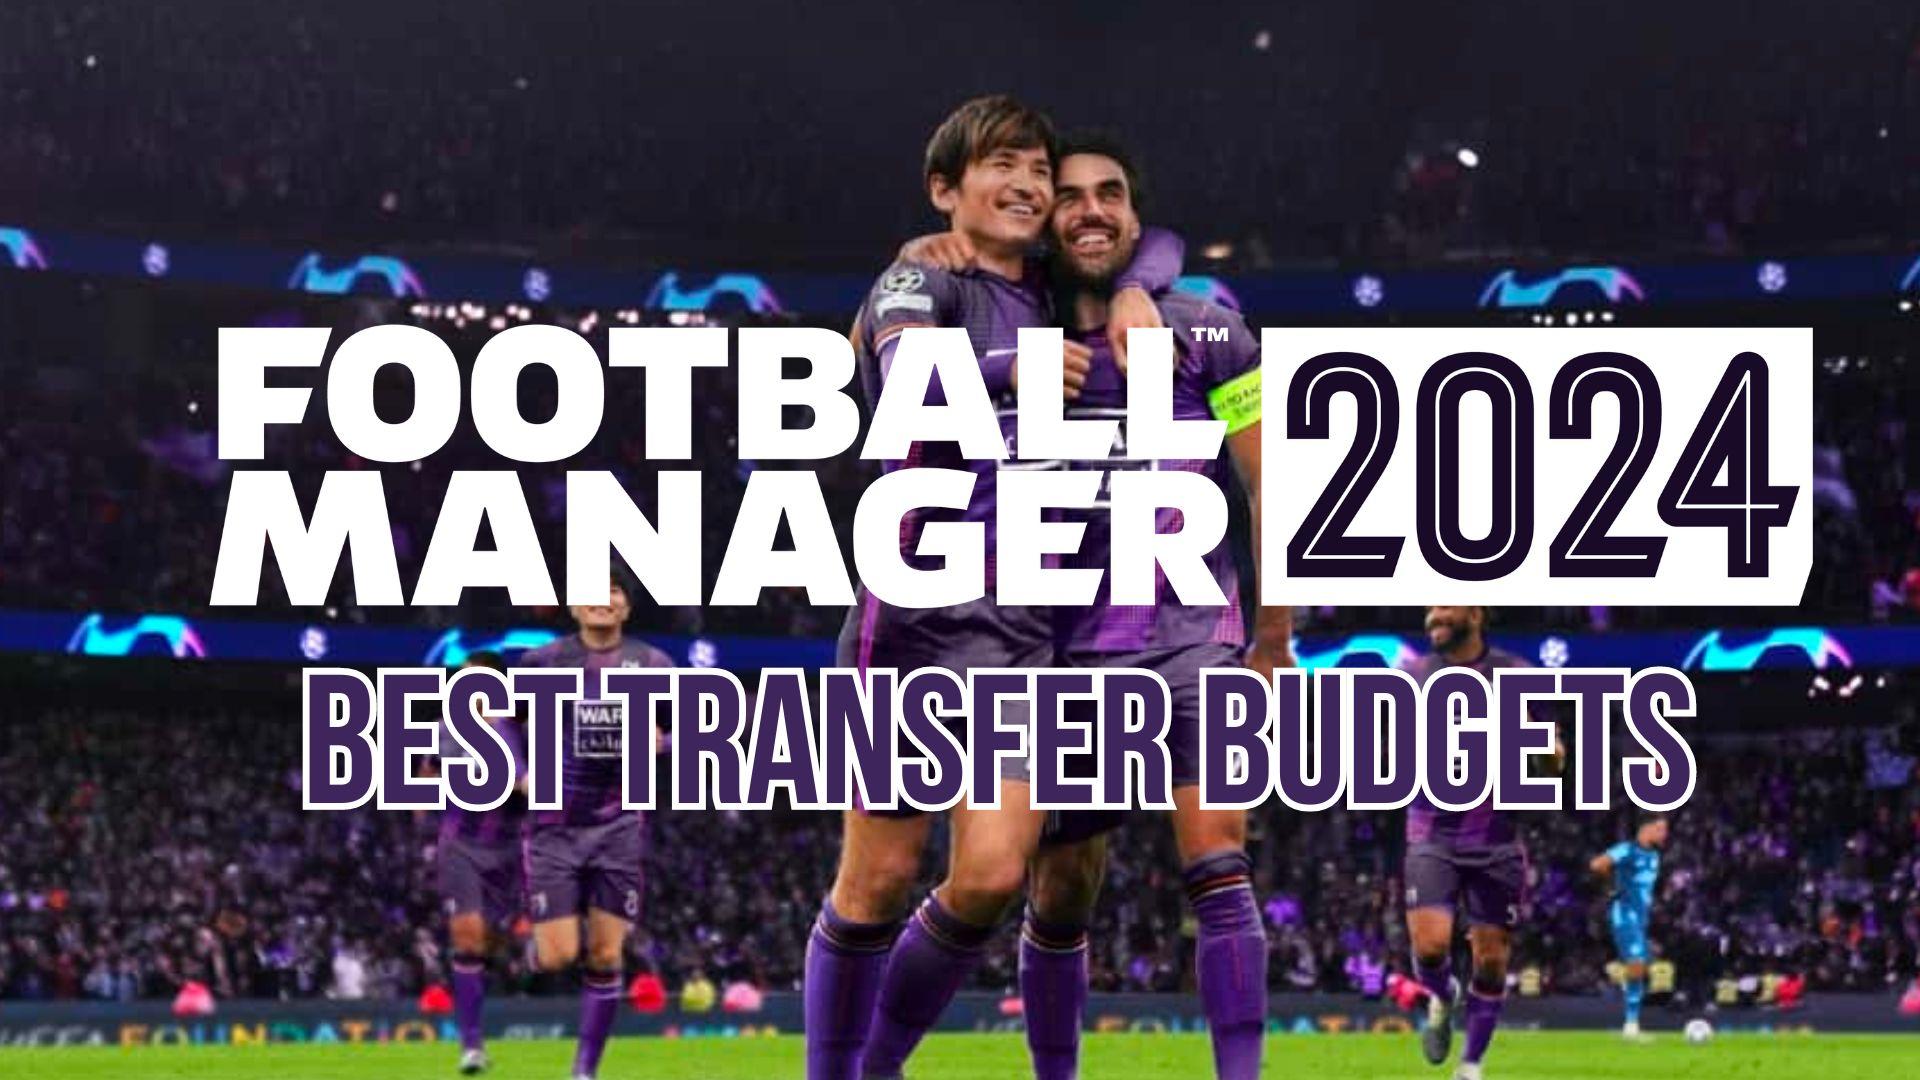 Football Manager 24 logo with players in background and text